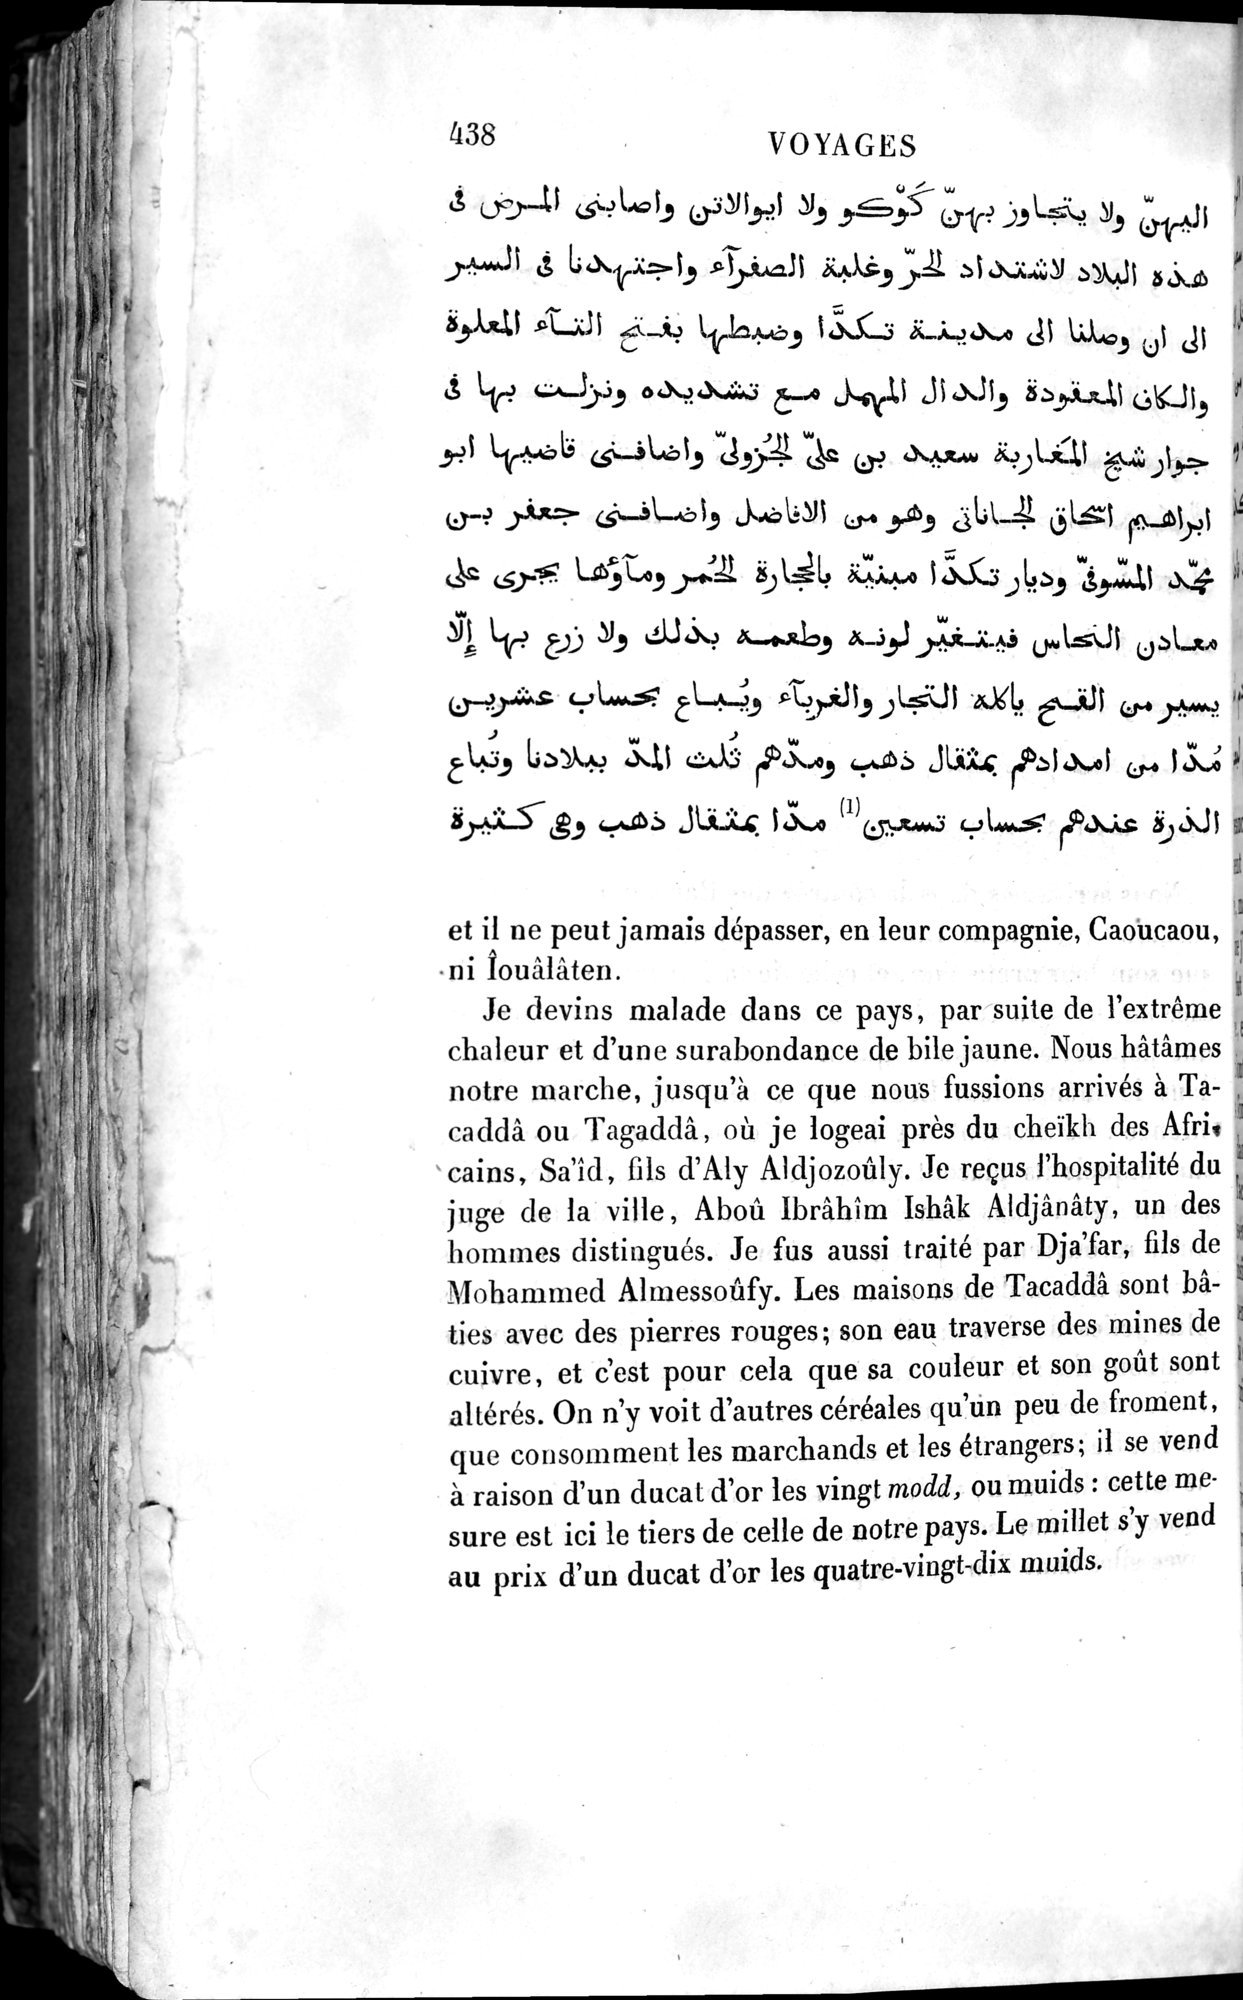 Voyages d'Ibn Batoutah : vol.4 / Page 450 (Grayscale High Resolution Image)